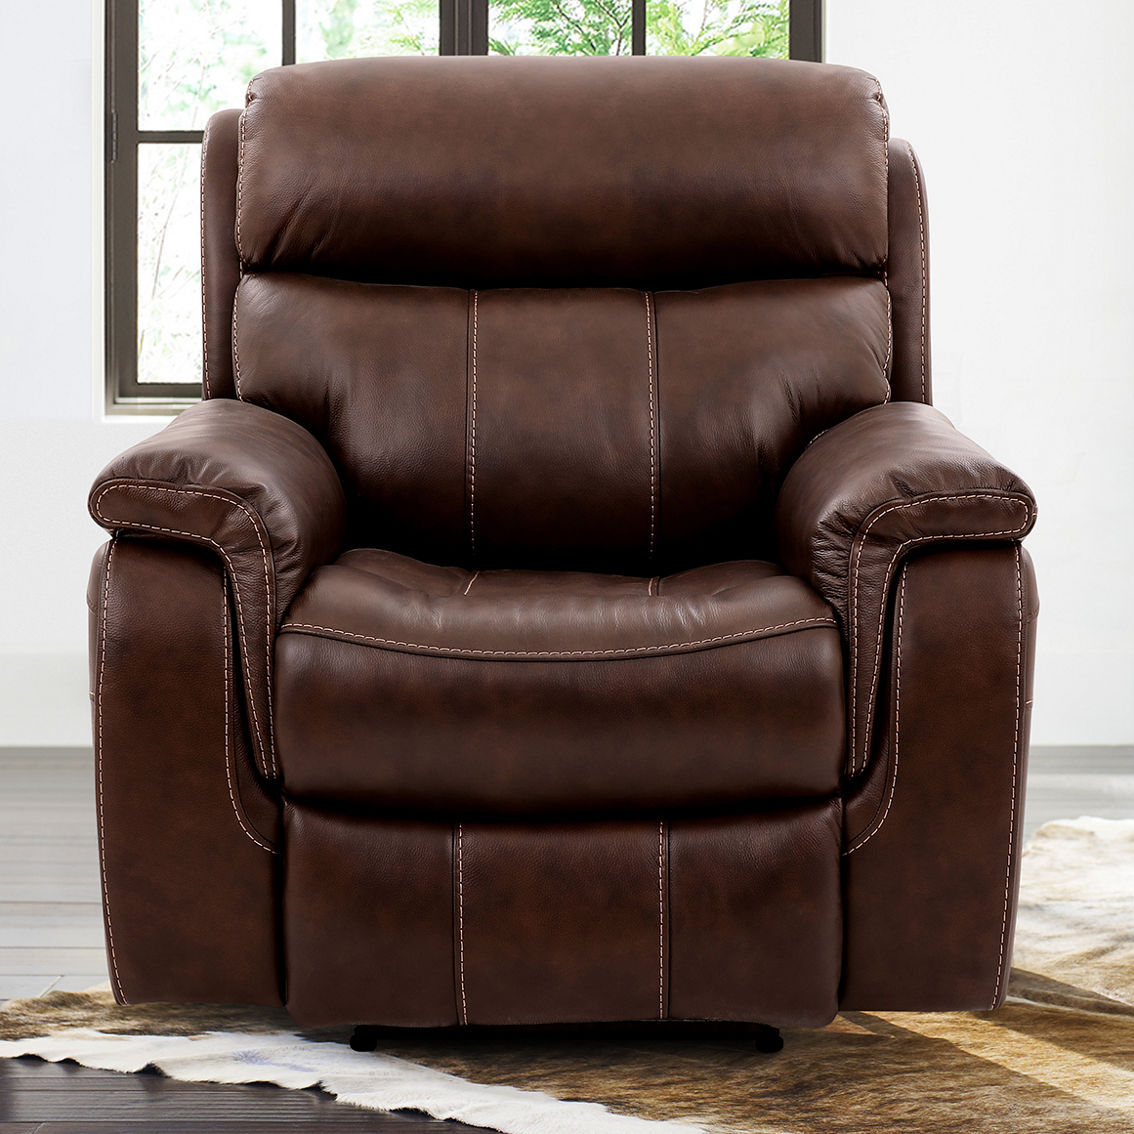 Armen Living Montague Dual Power Headrest and Lumbar Support Leather Recliner - Image 9 of 9